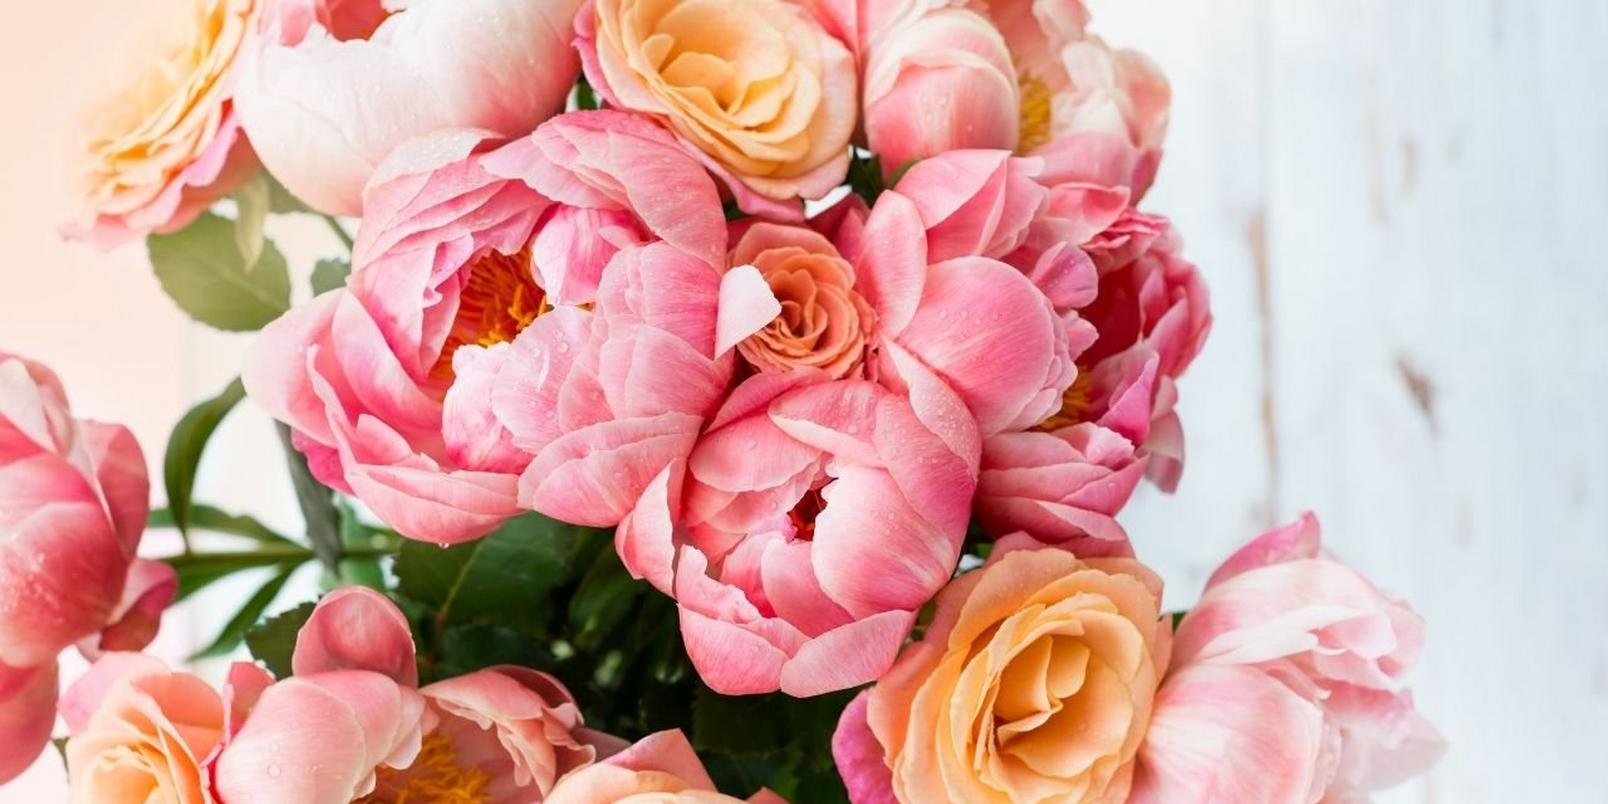 peonies-facts-that-may-surprise-you-3